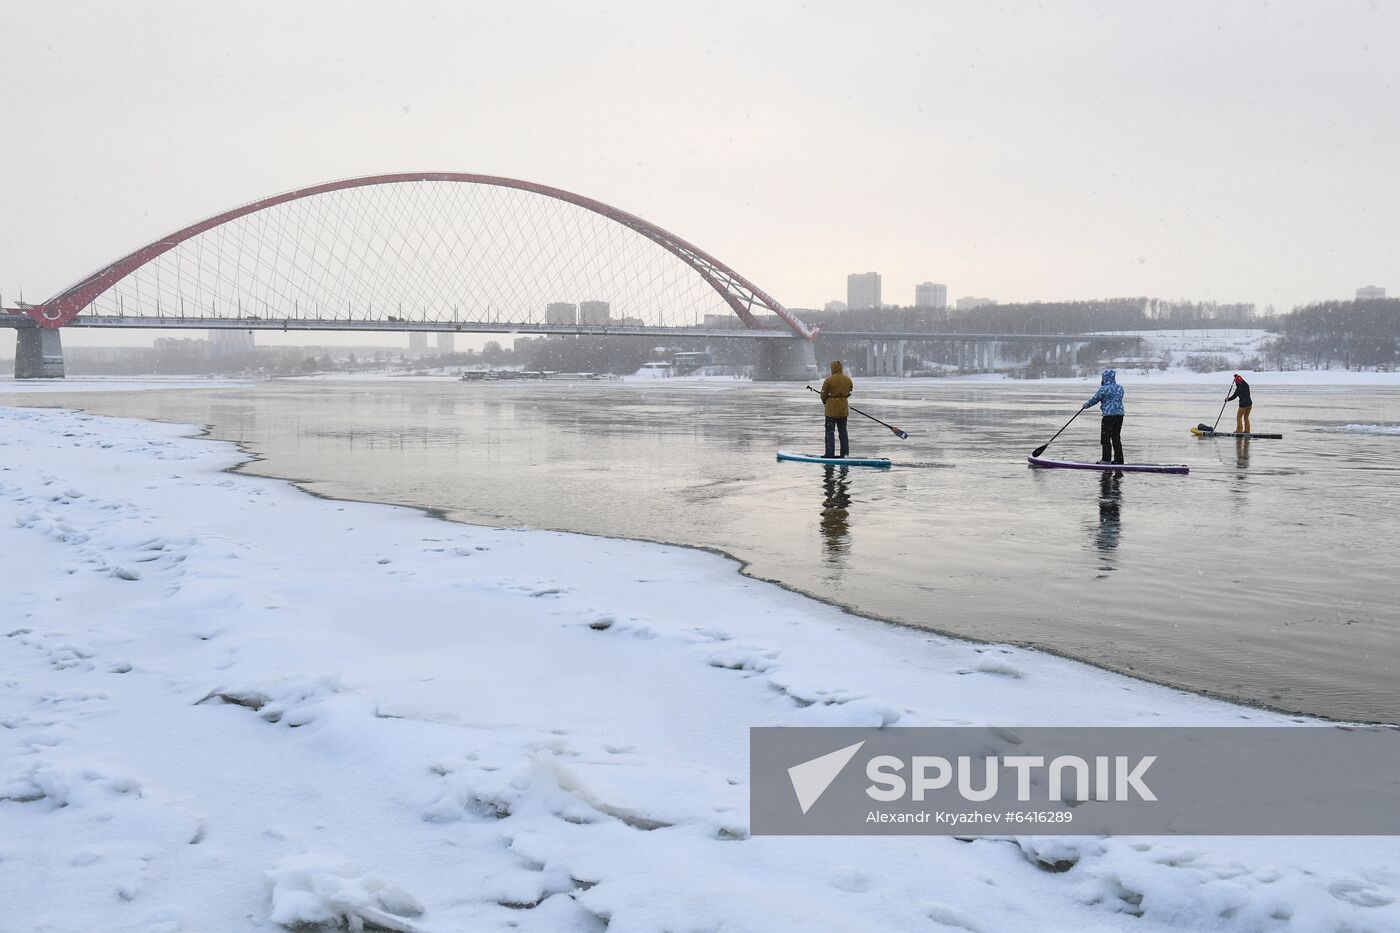 Russia Winter SUP Surfing